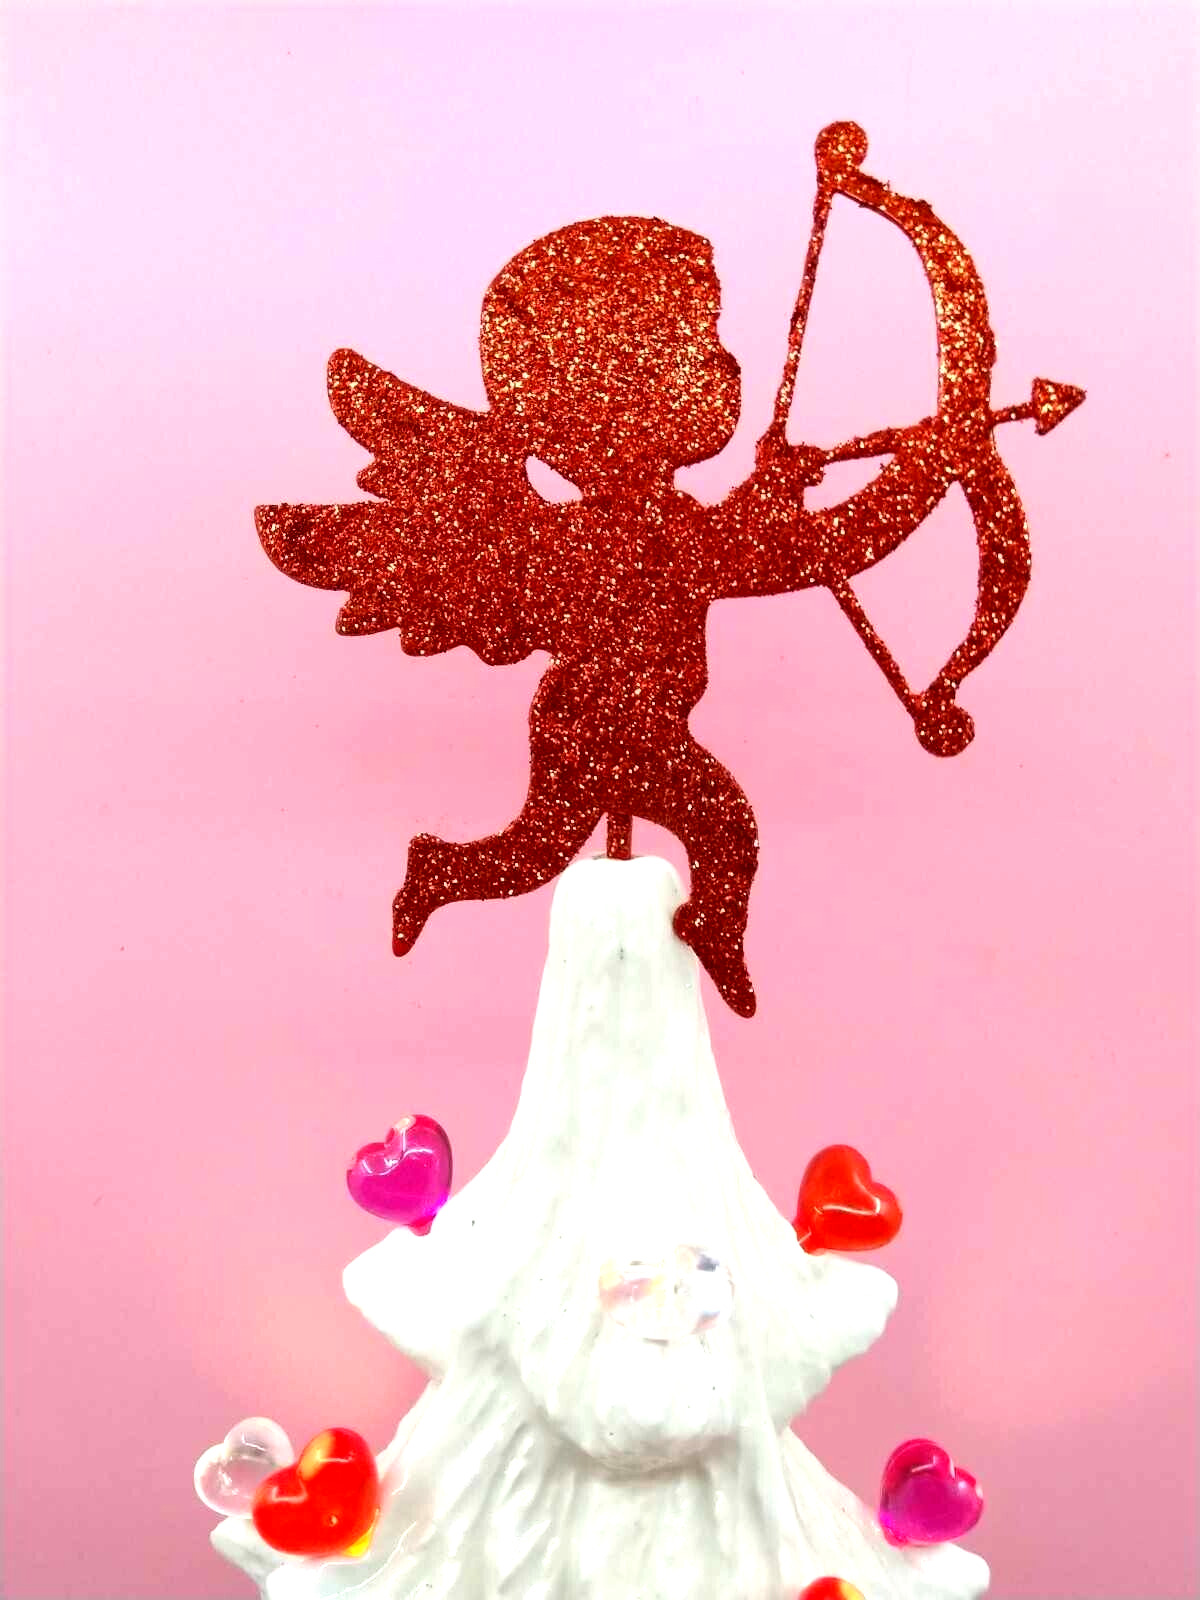 Lg Valentine Cupid w Bow Topper & 6 Heart Lights for Ceramic Christmas Tree Star